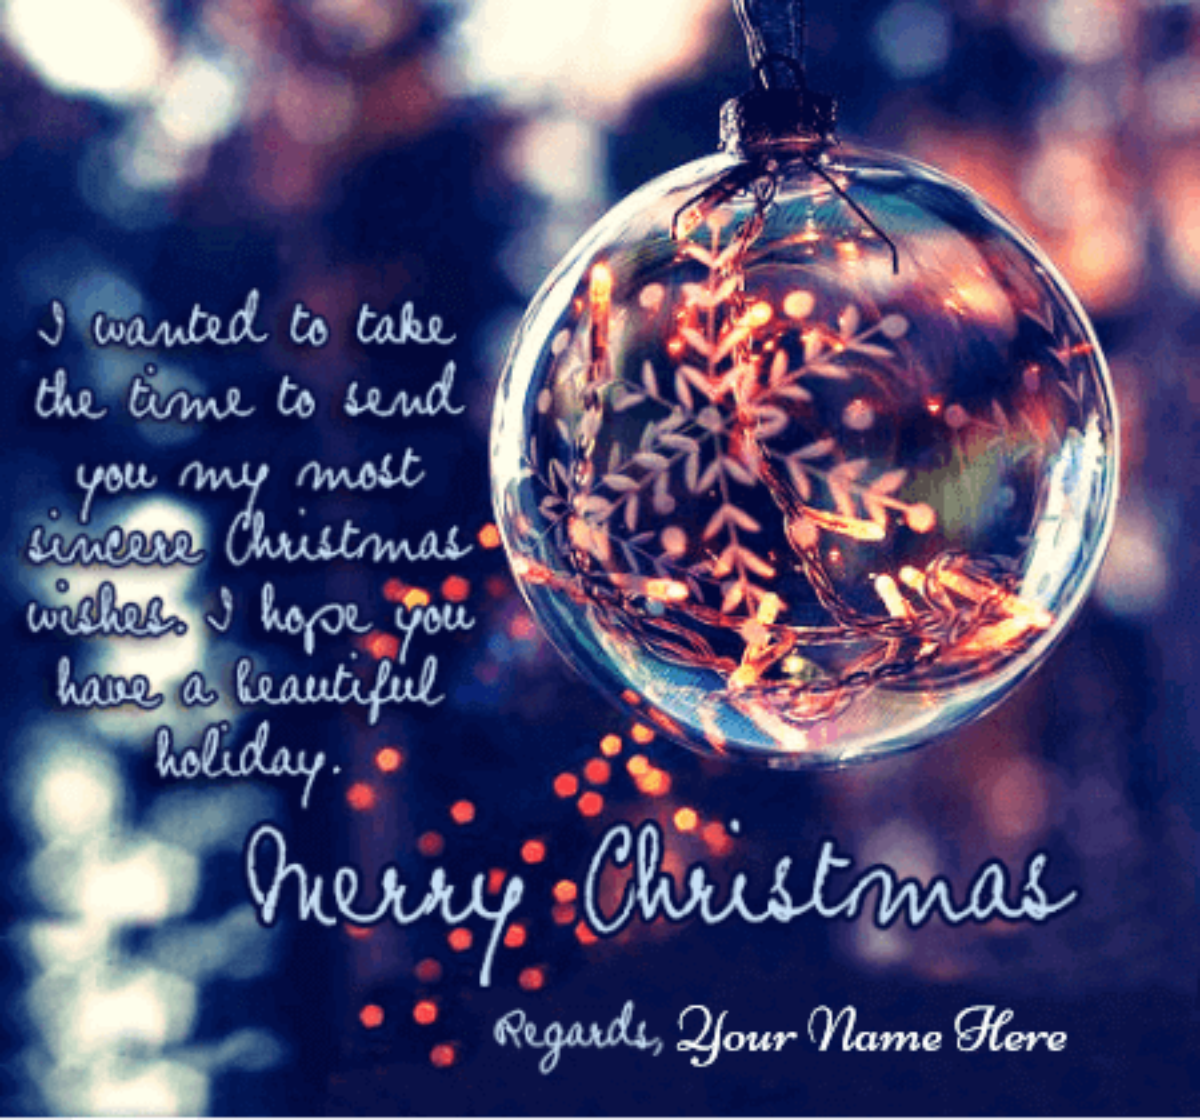 Short Merry Christmas Quotes - Christmas Wishes With Name